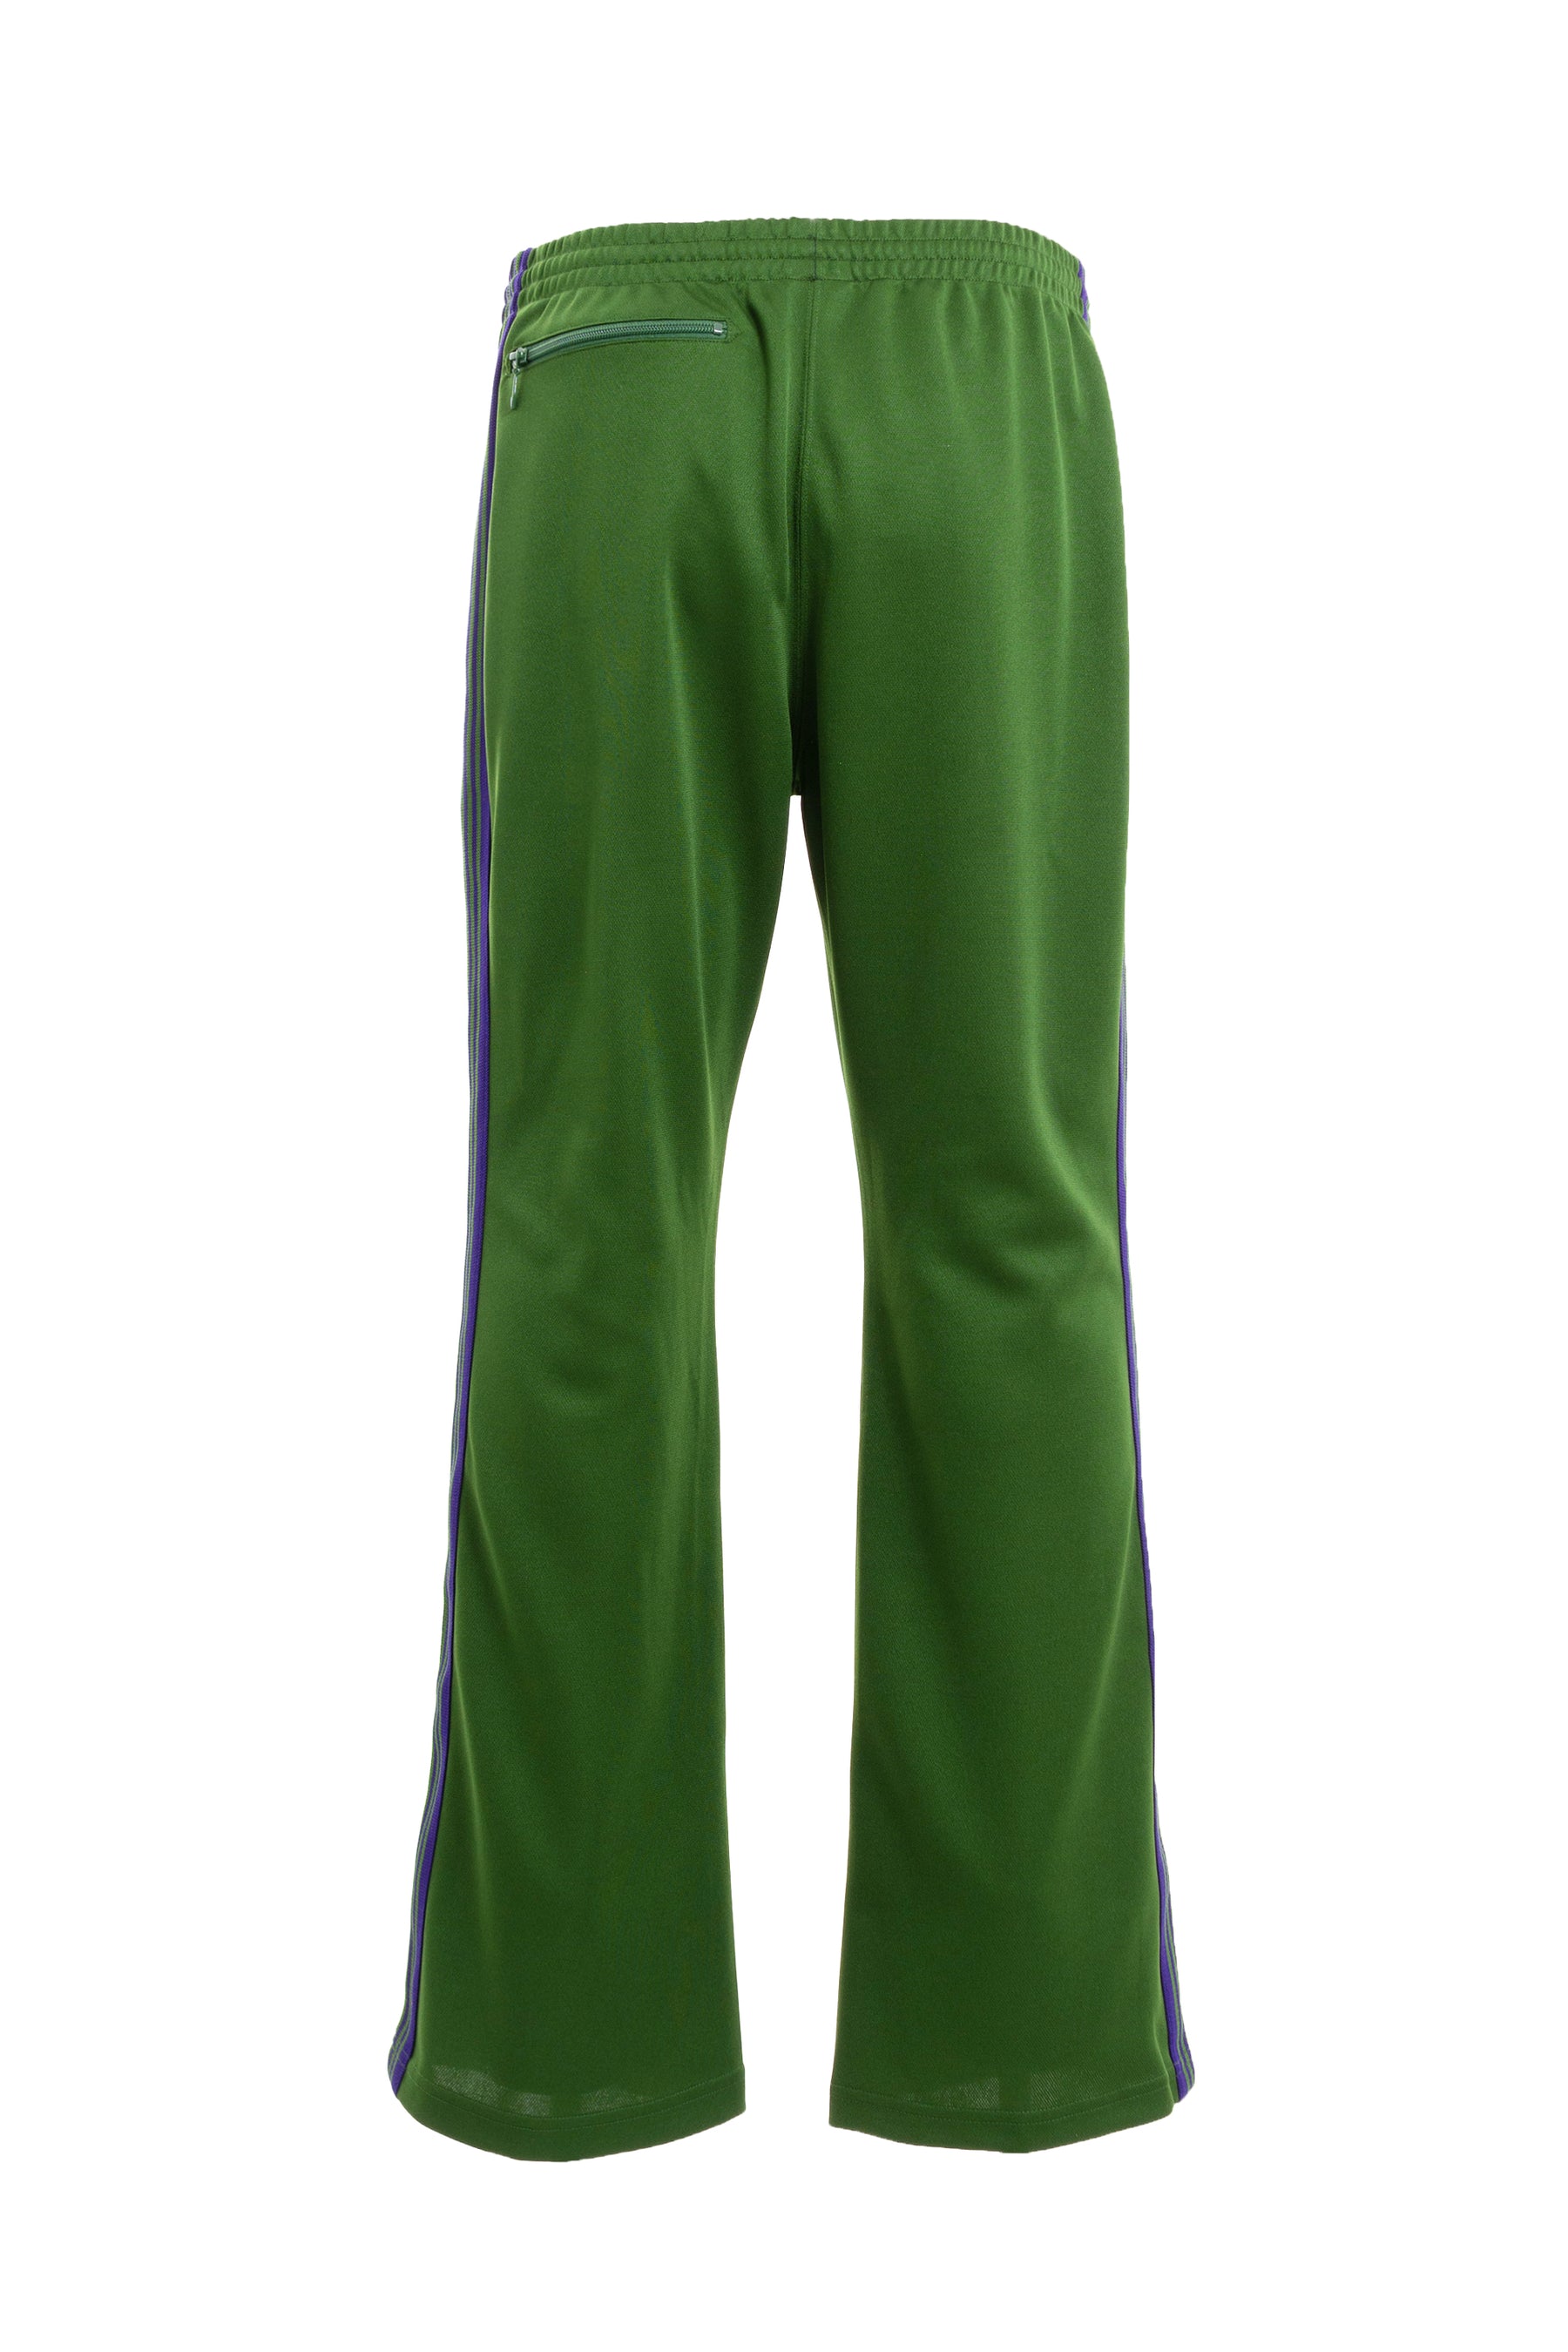 BOOT-CUT TRACK PANT - POLY SMOOTH / IVY GRN